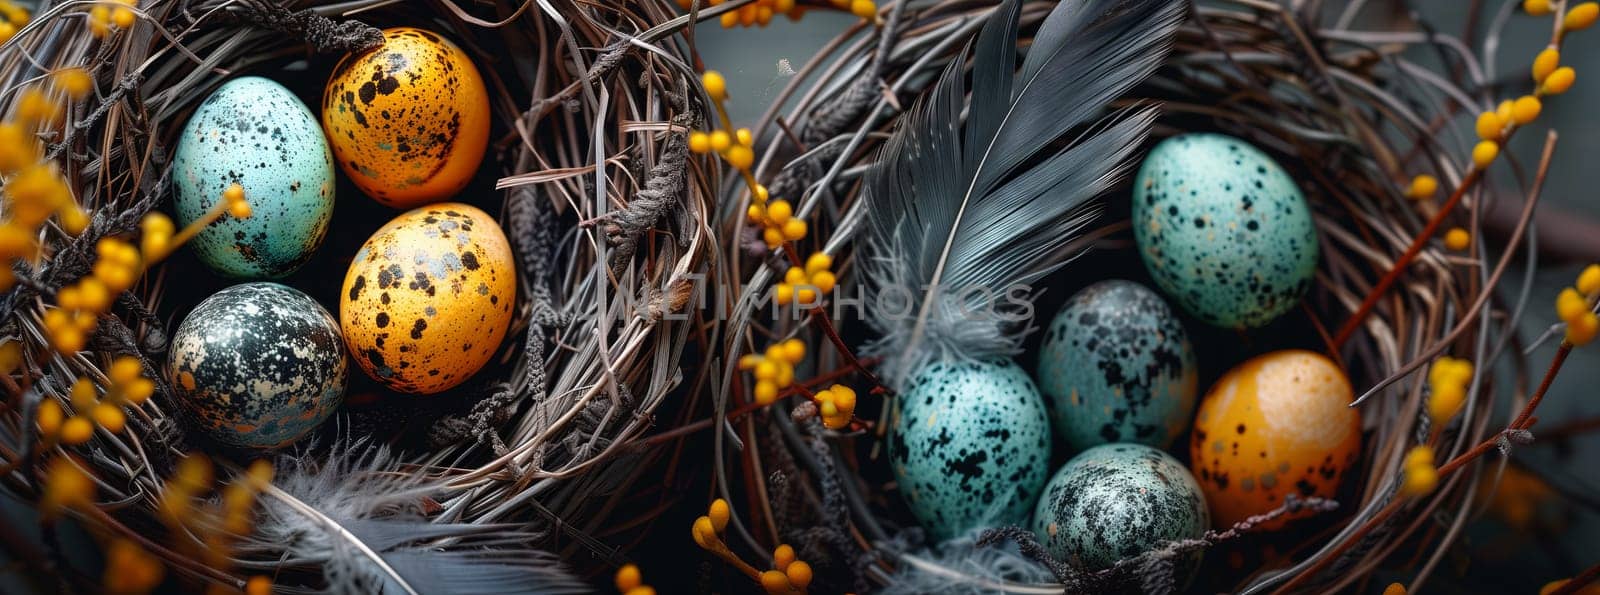 a bird nest filled with eggs and feathers by richwolf